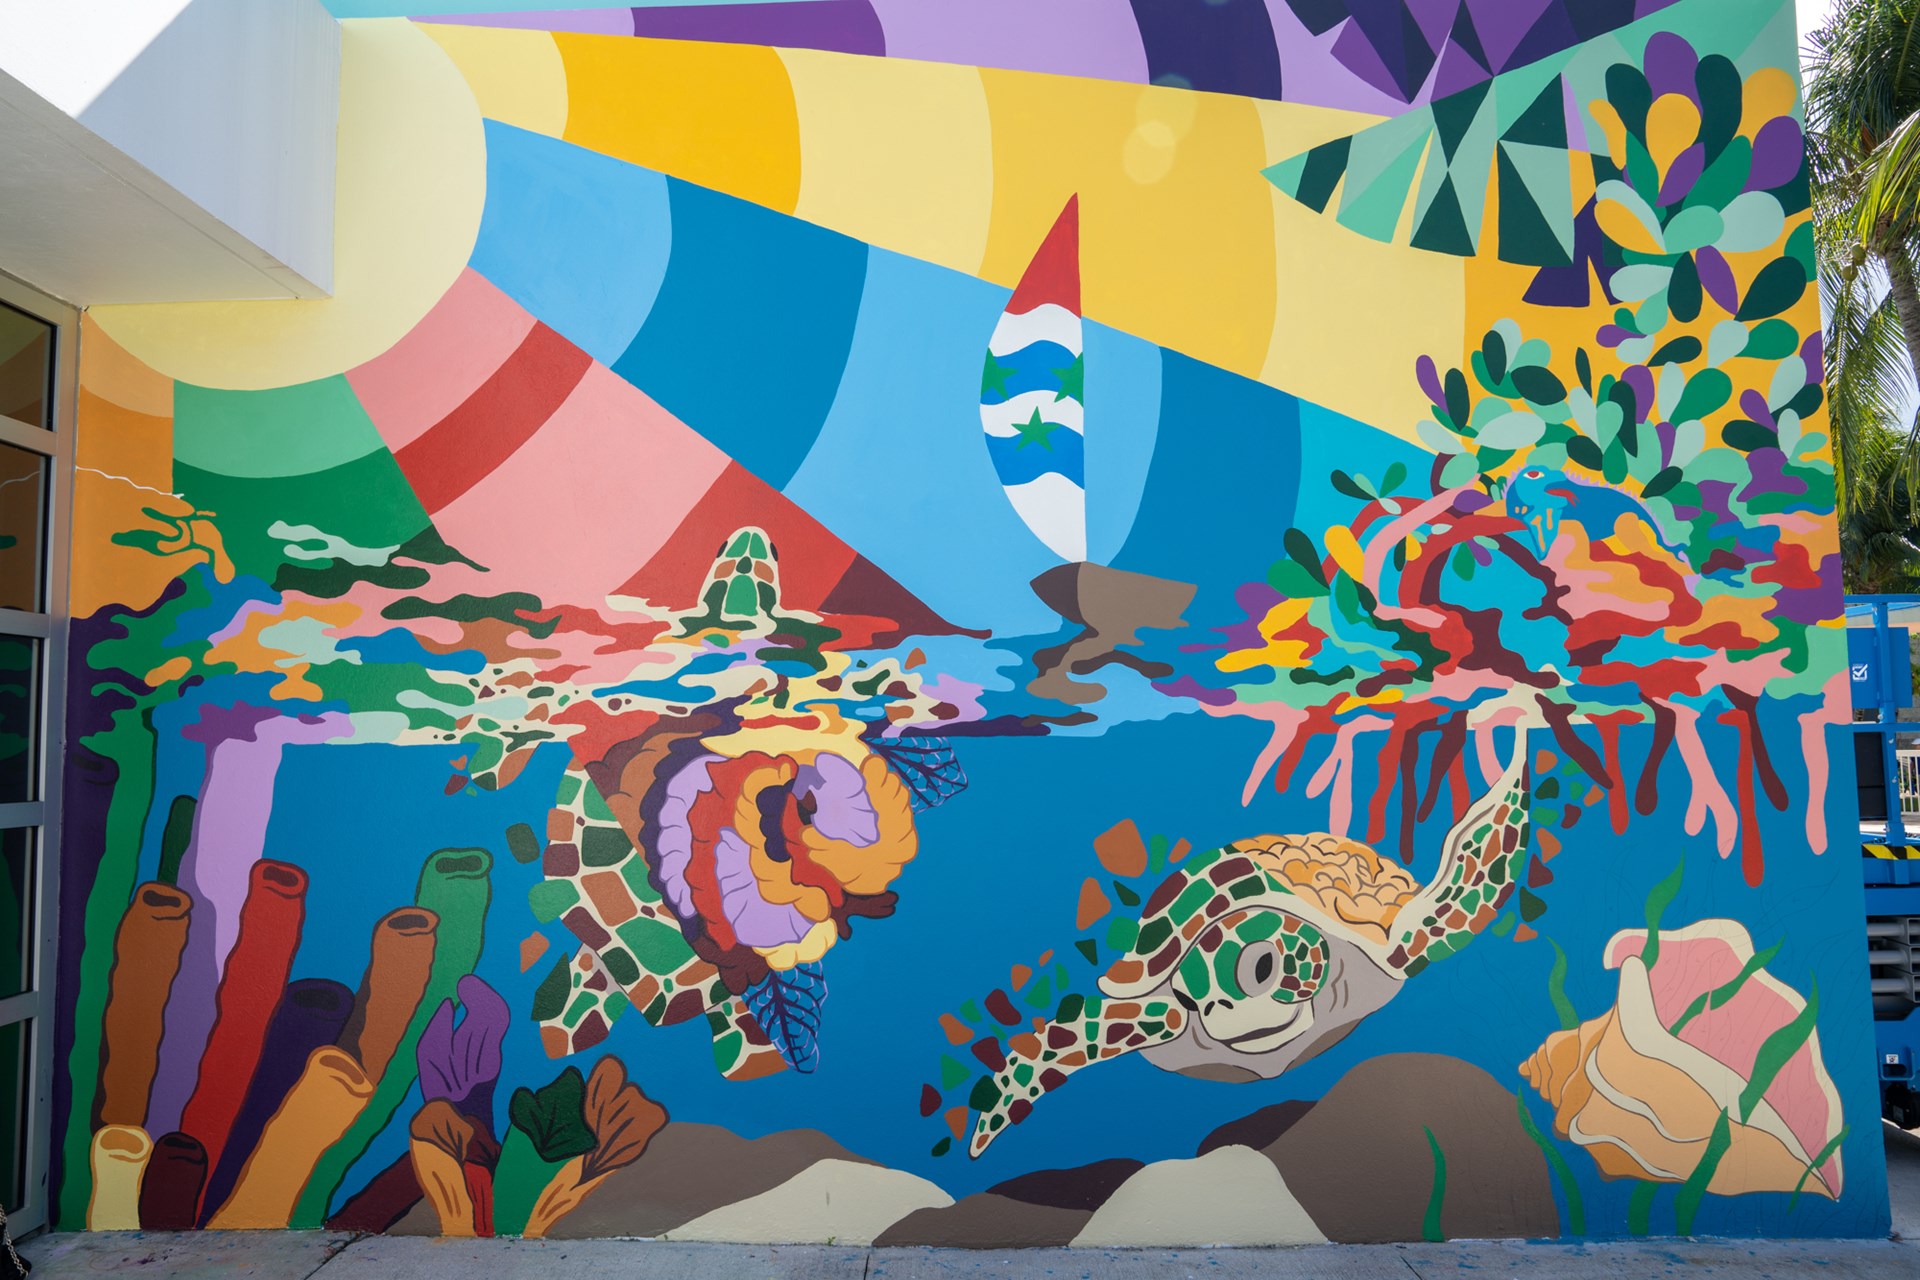 New mural unveiled in Camana Bay; collaboration between Cayman International School students and Dart